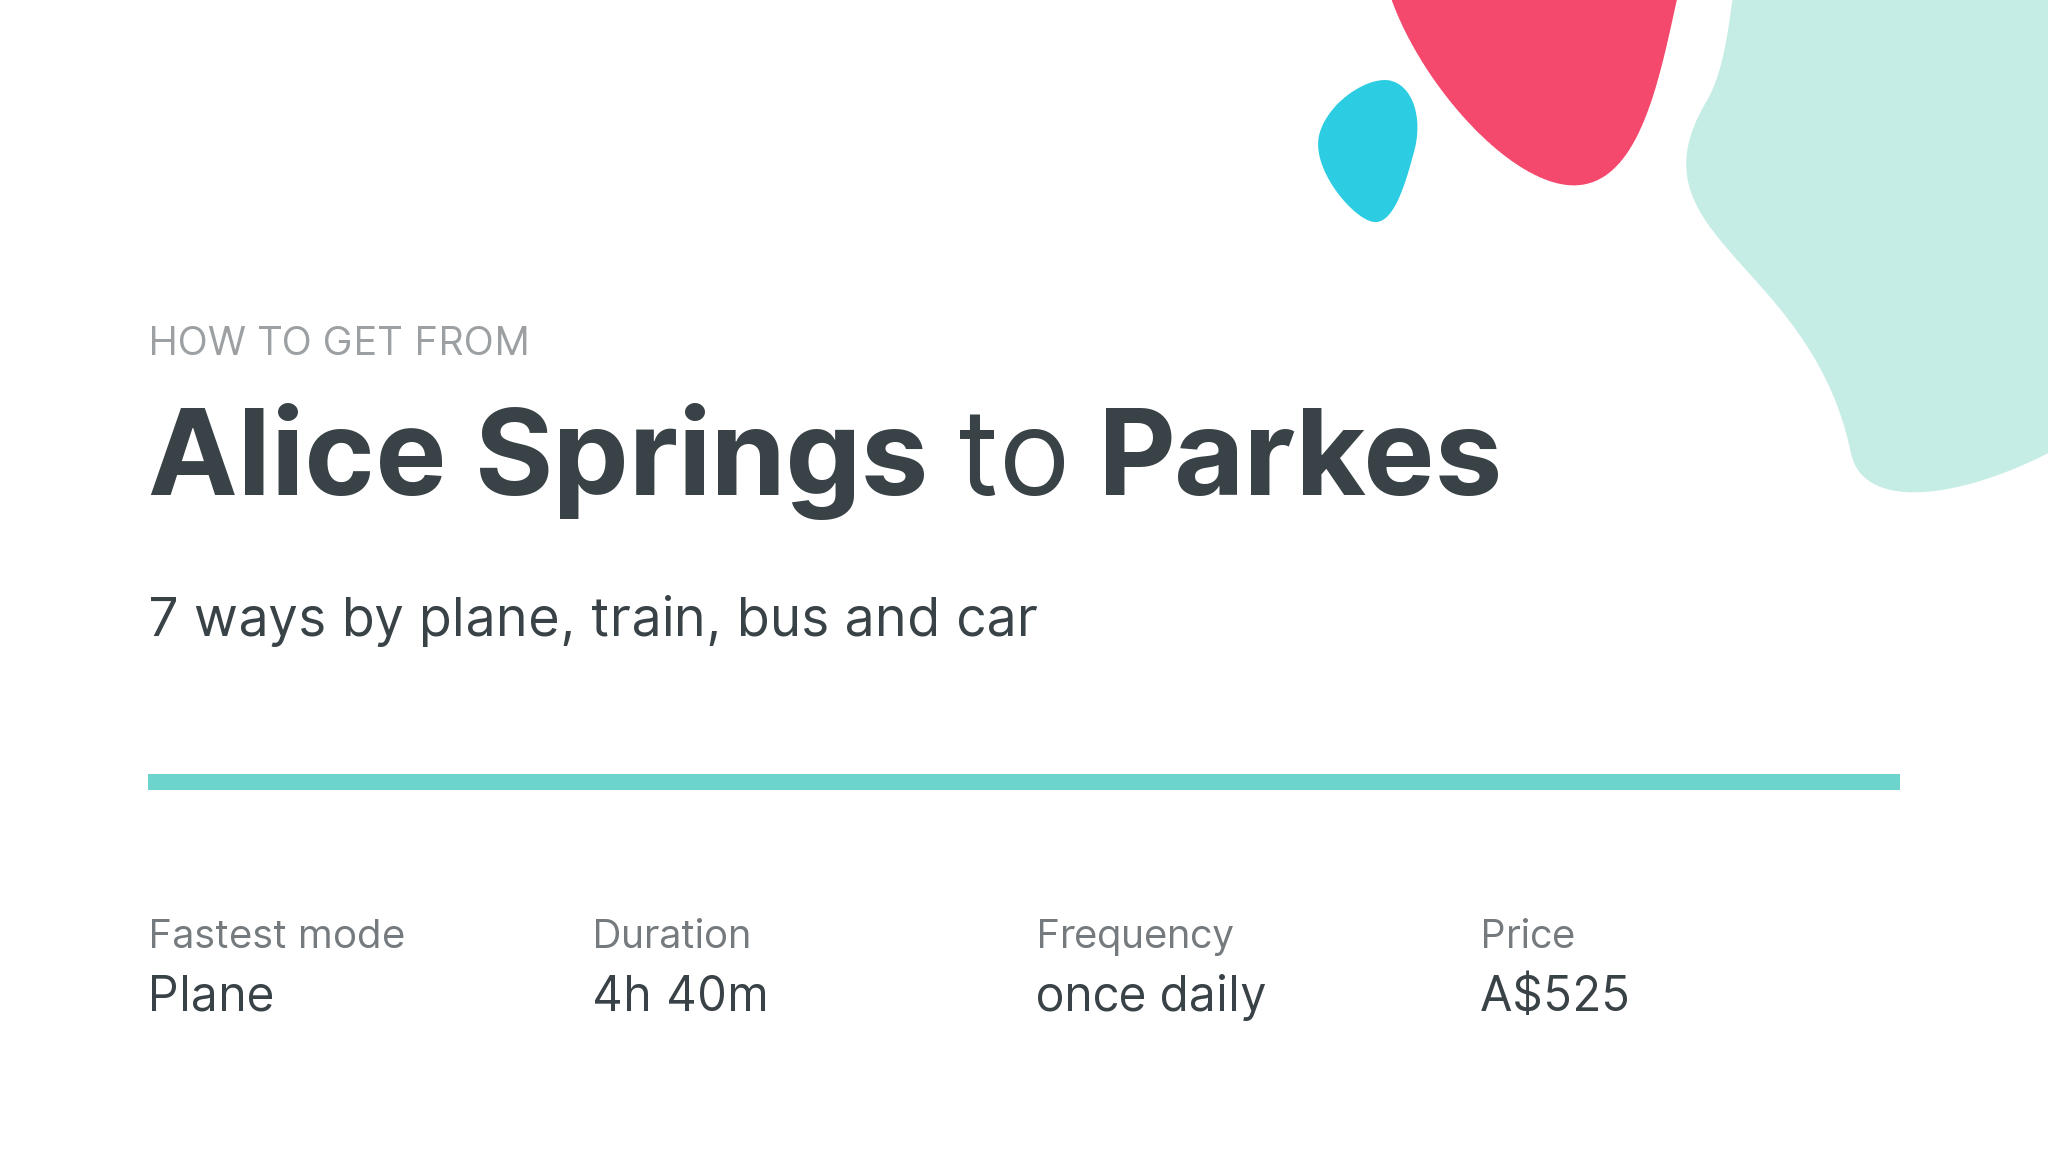 How do I get from Alice Springs to Parkes